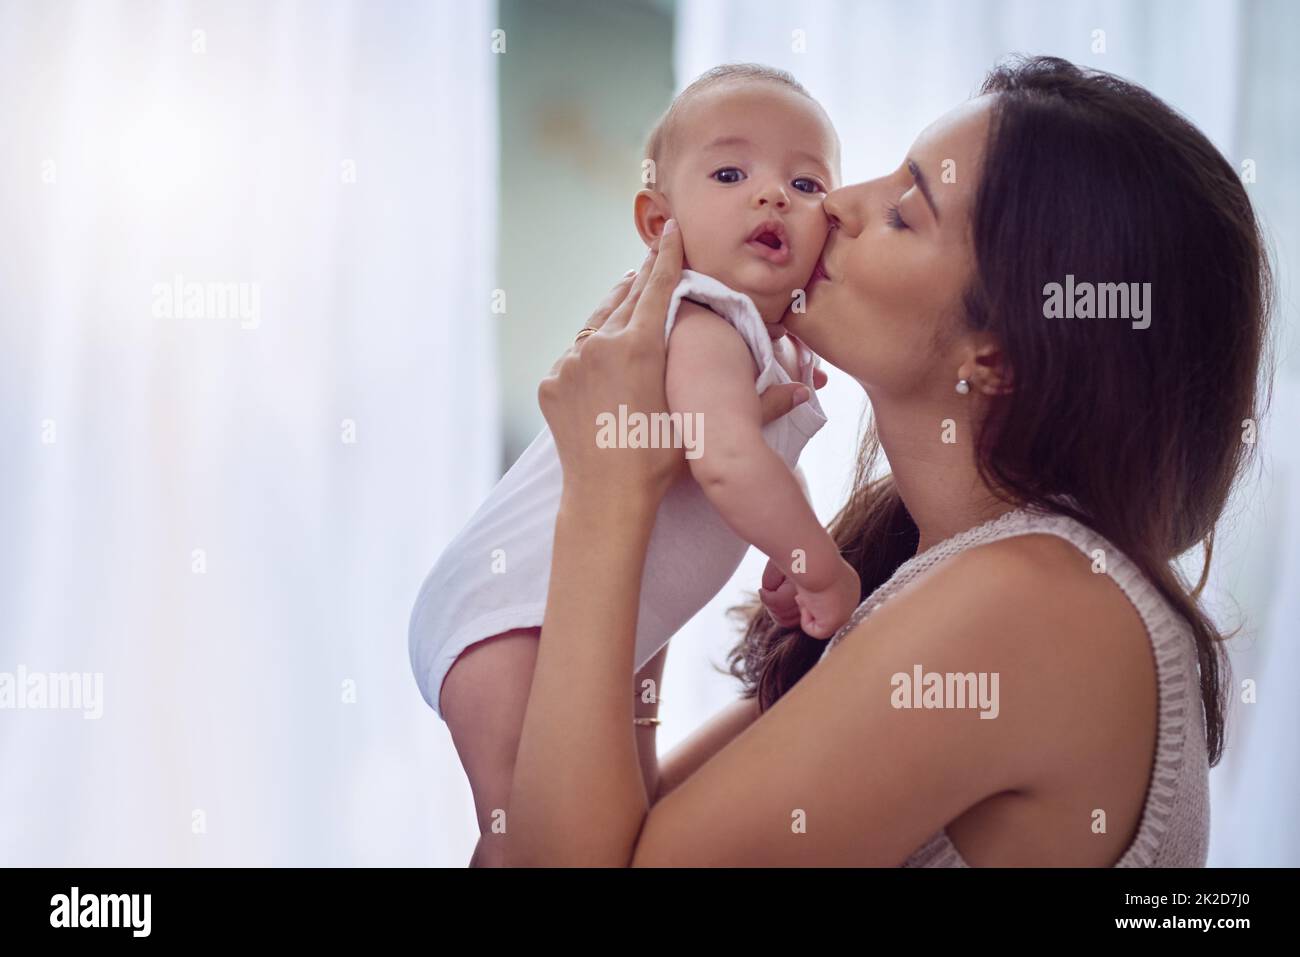 I know, these cheeks are hard to resist. Shot of a young woman bonding with her baby boy at home. Stock Photo